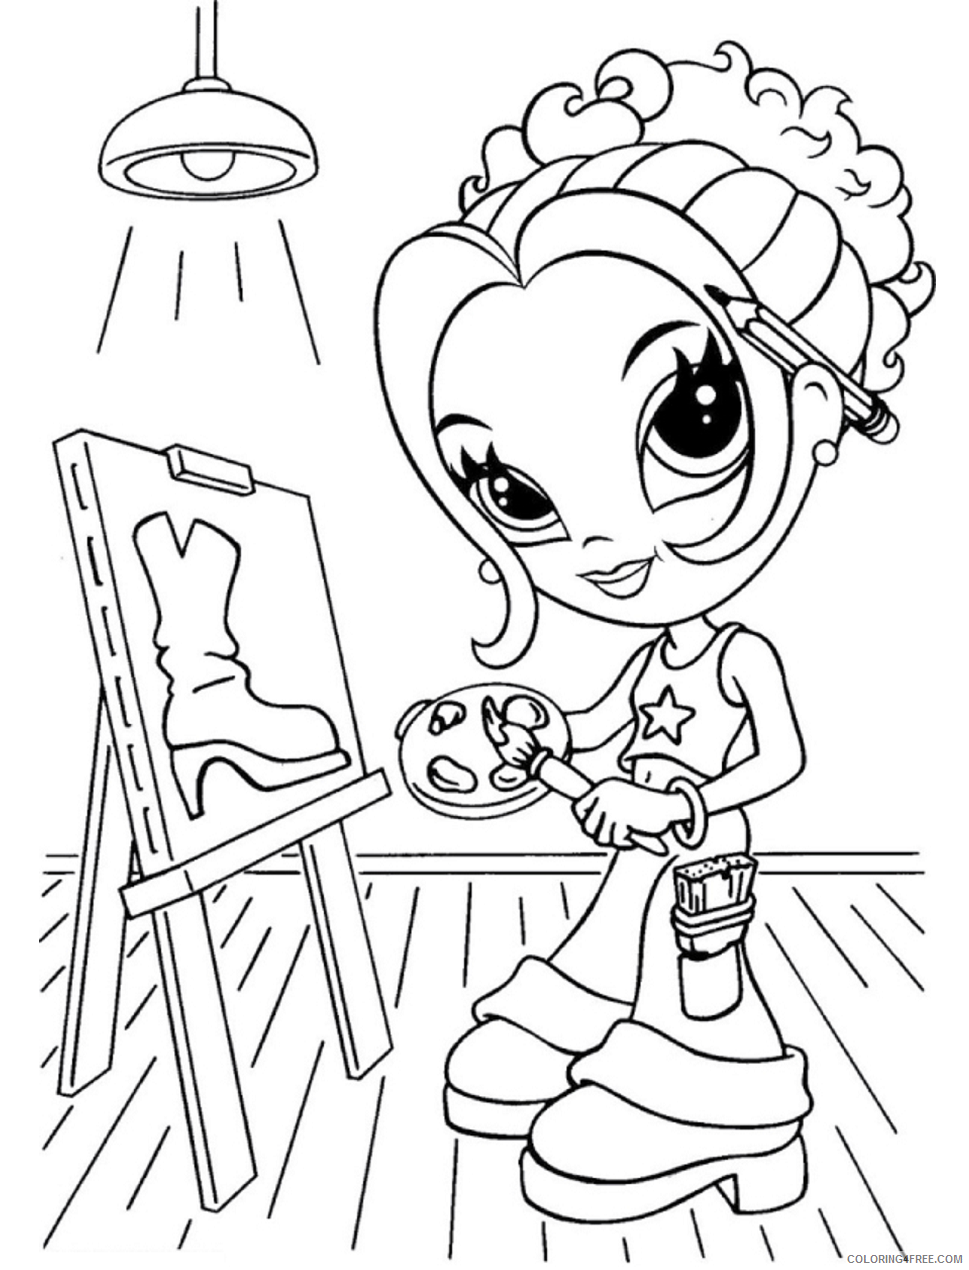 Girl Coloring Pages for Girls glamour_girl_painting Printable 2021 0500 Coloring4free